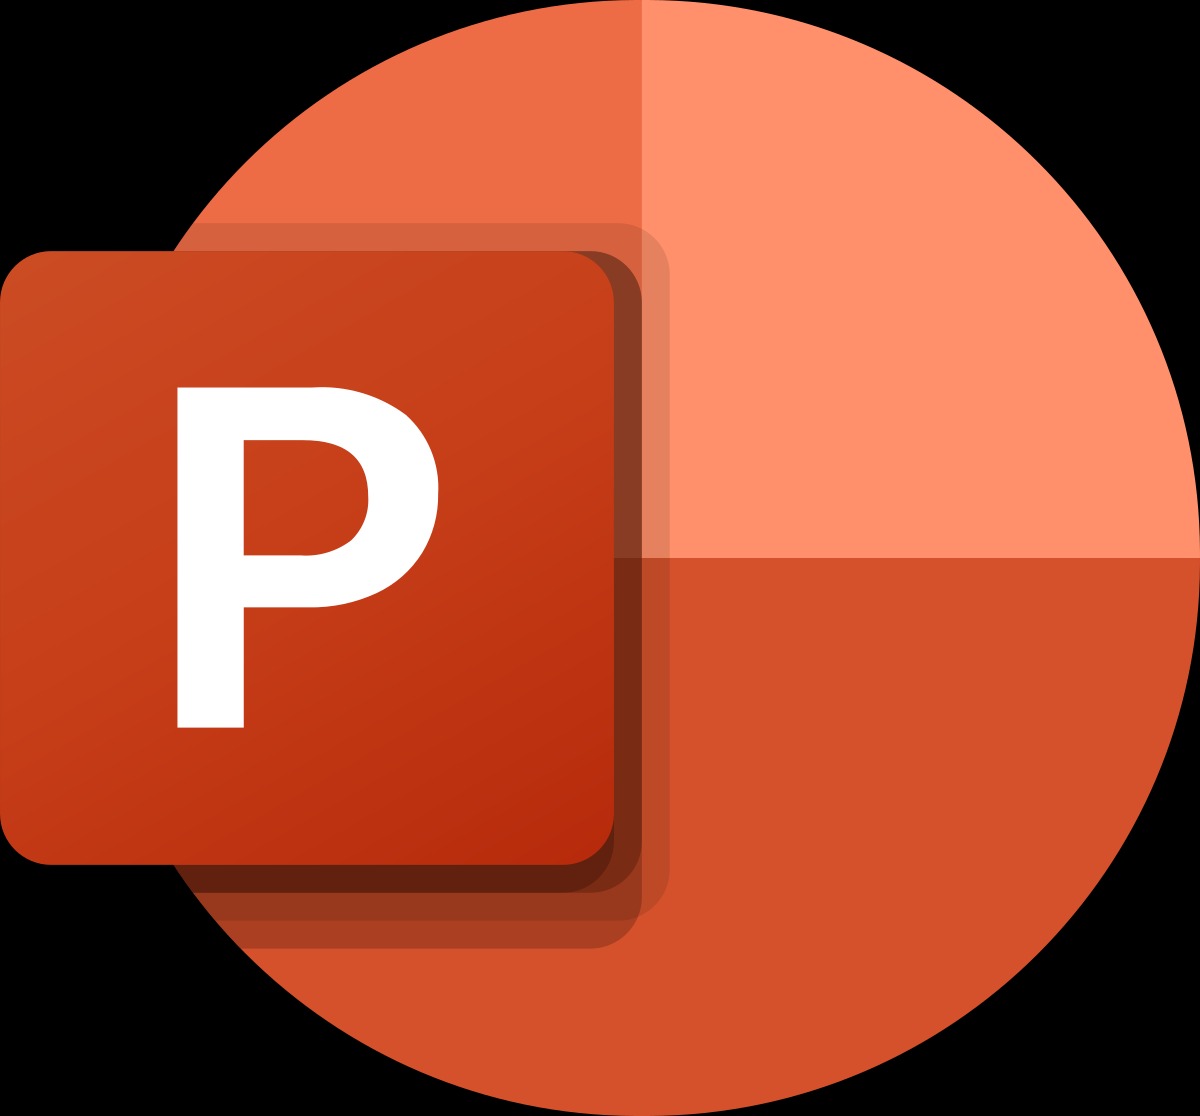 What Is Microsoft PowerPoint?